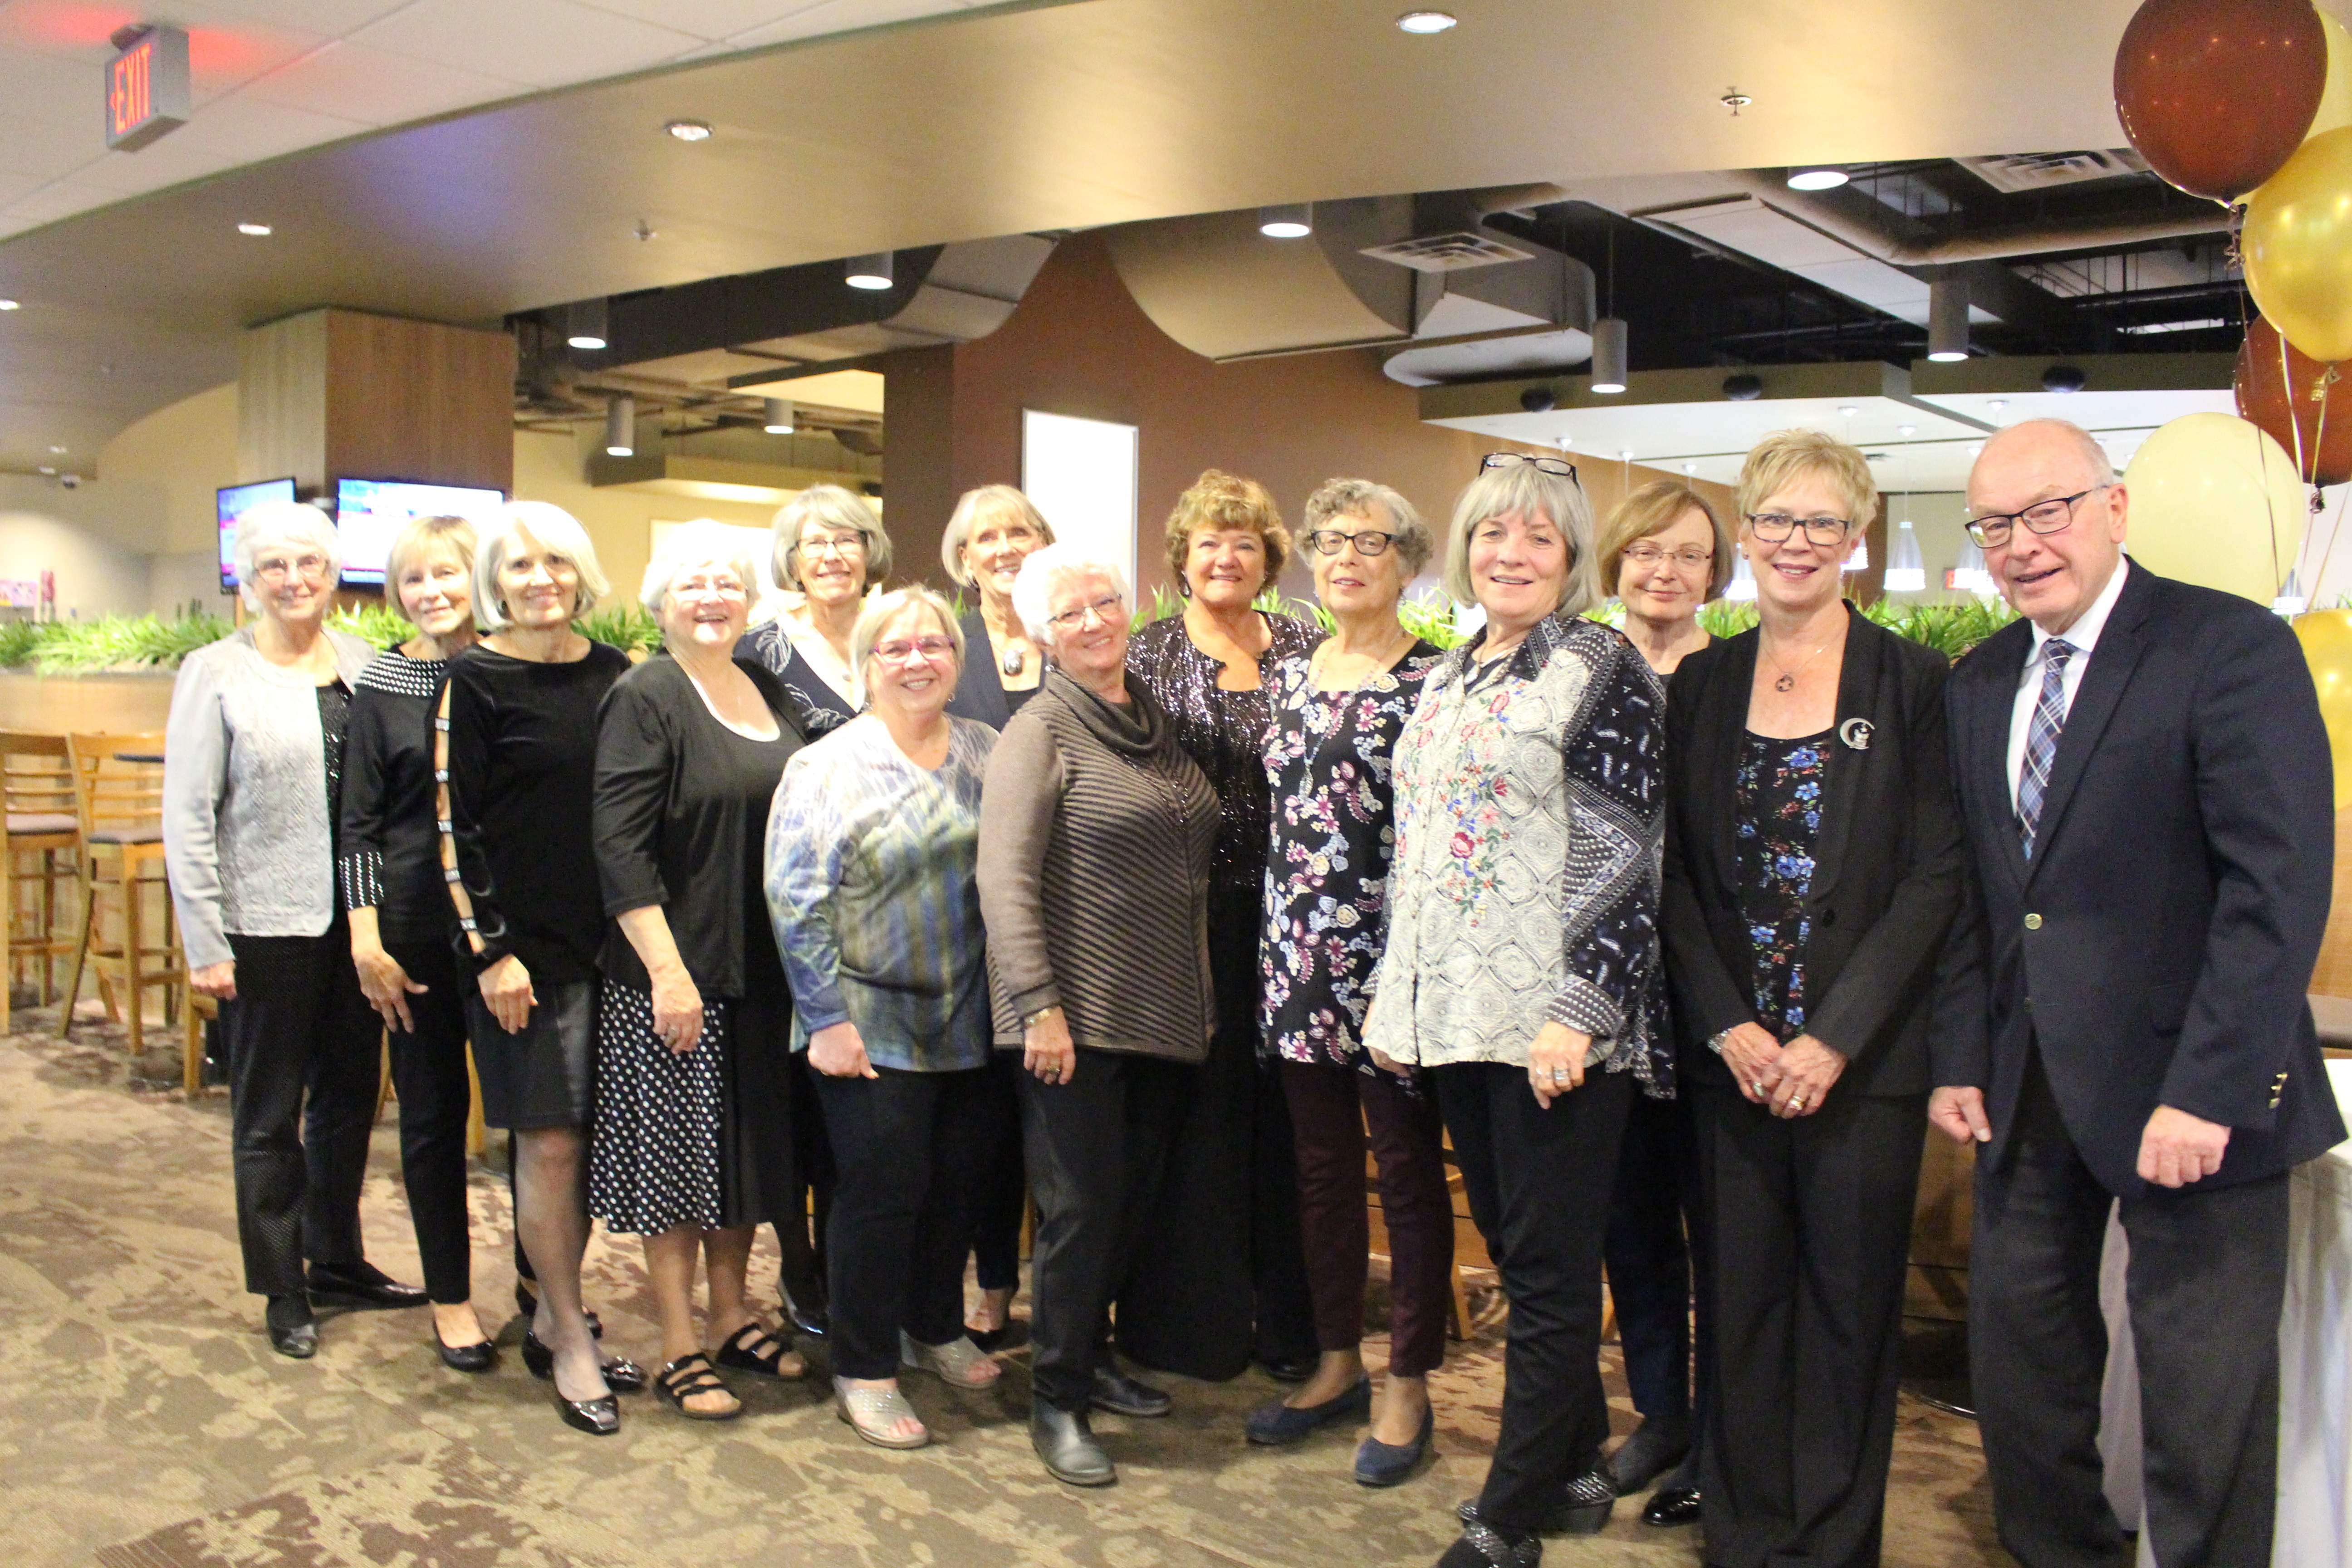 ALUMNI FROM THE COLLEGE OF REHABILITATION SCIENCES CLASS OF 1968